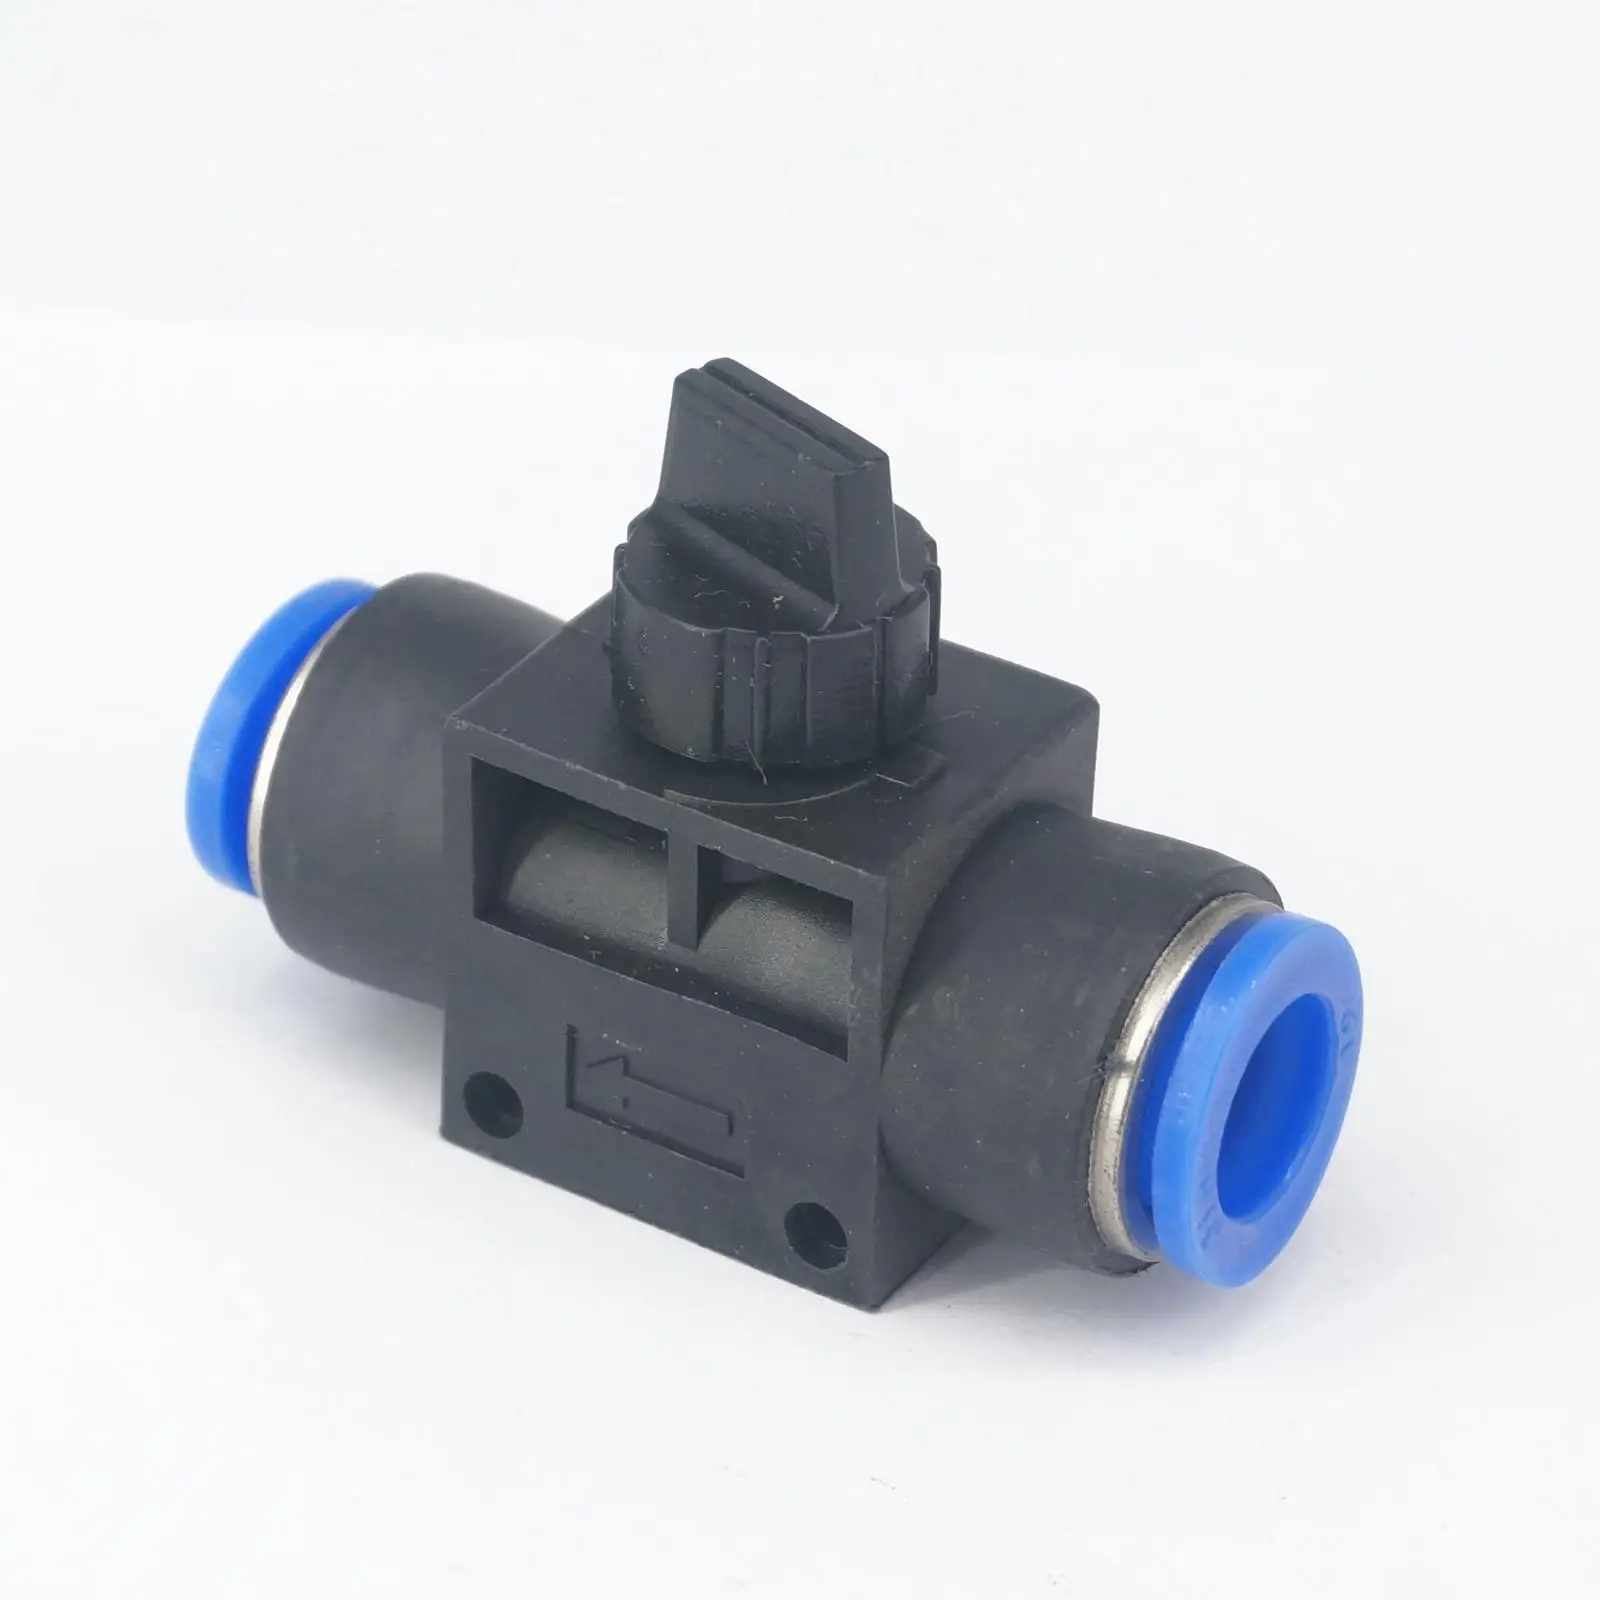 Vacuum Push Fit Manual Venting Shut Off Valve also can be on  Compressed Air 